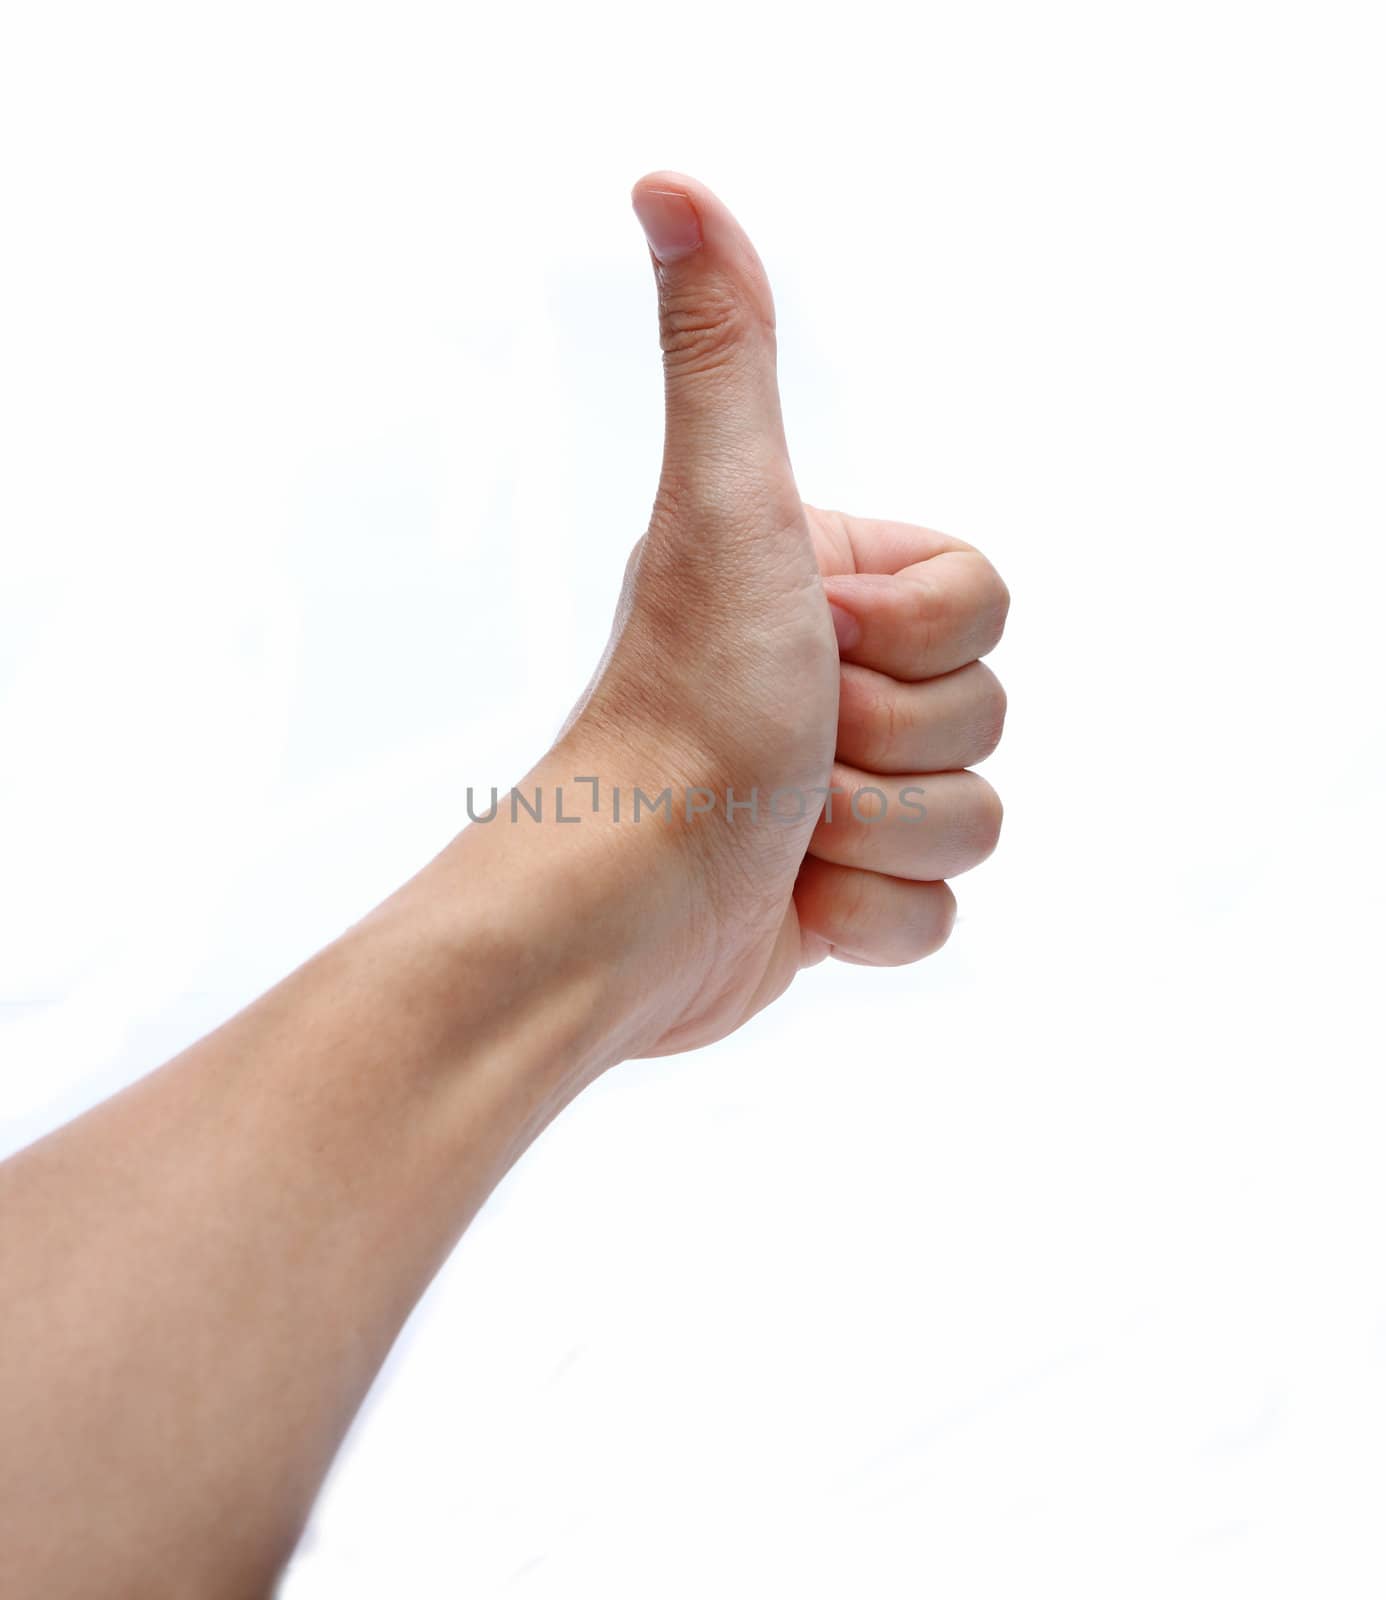 Portrait of hand showing goodluck sign against white background  by cozyta